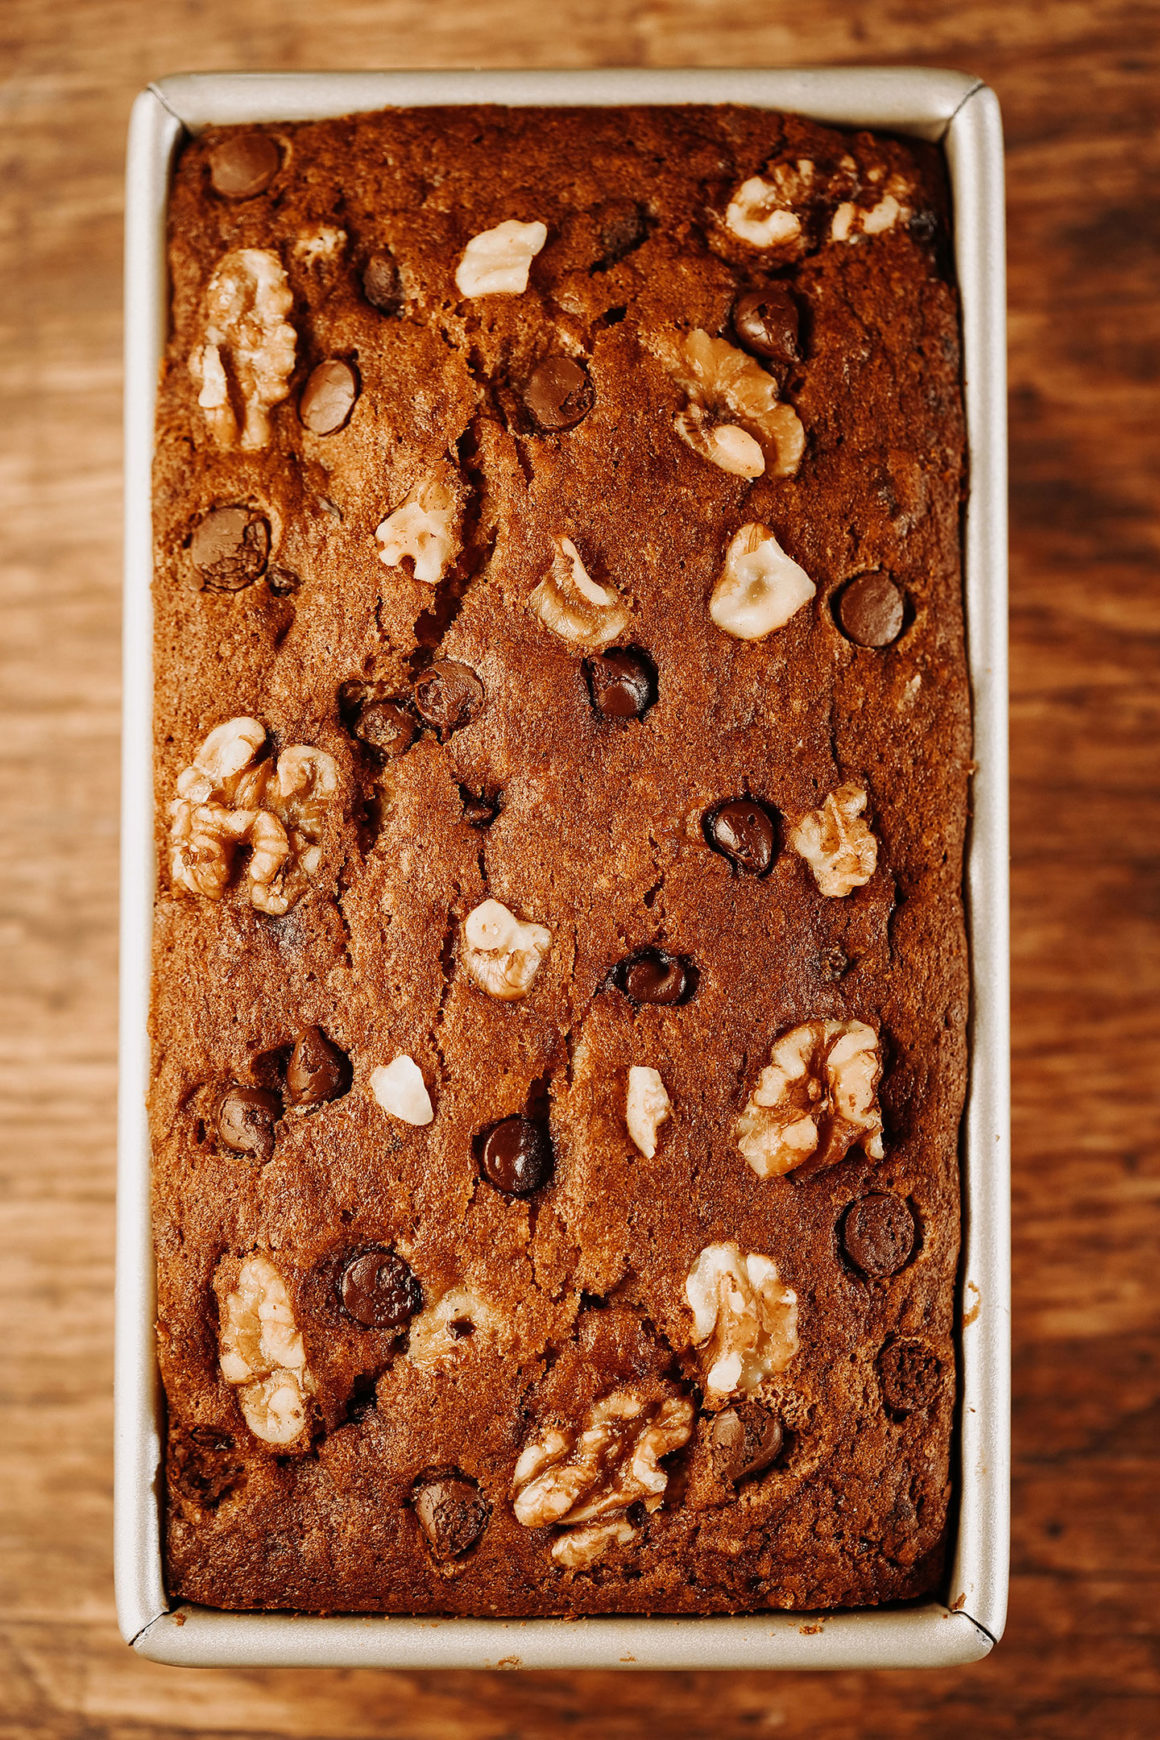 Banana Bread Loaf with Chocolate and Walnuts